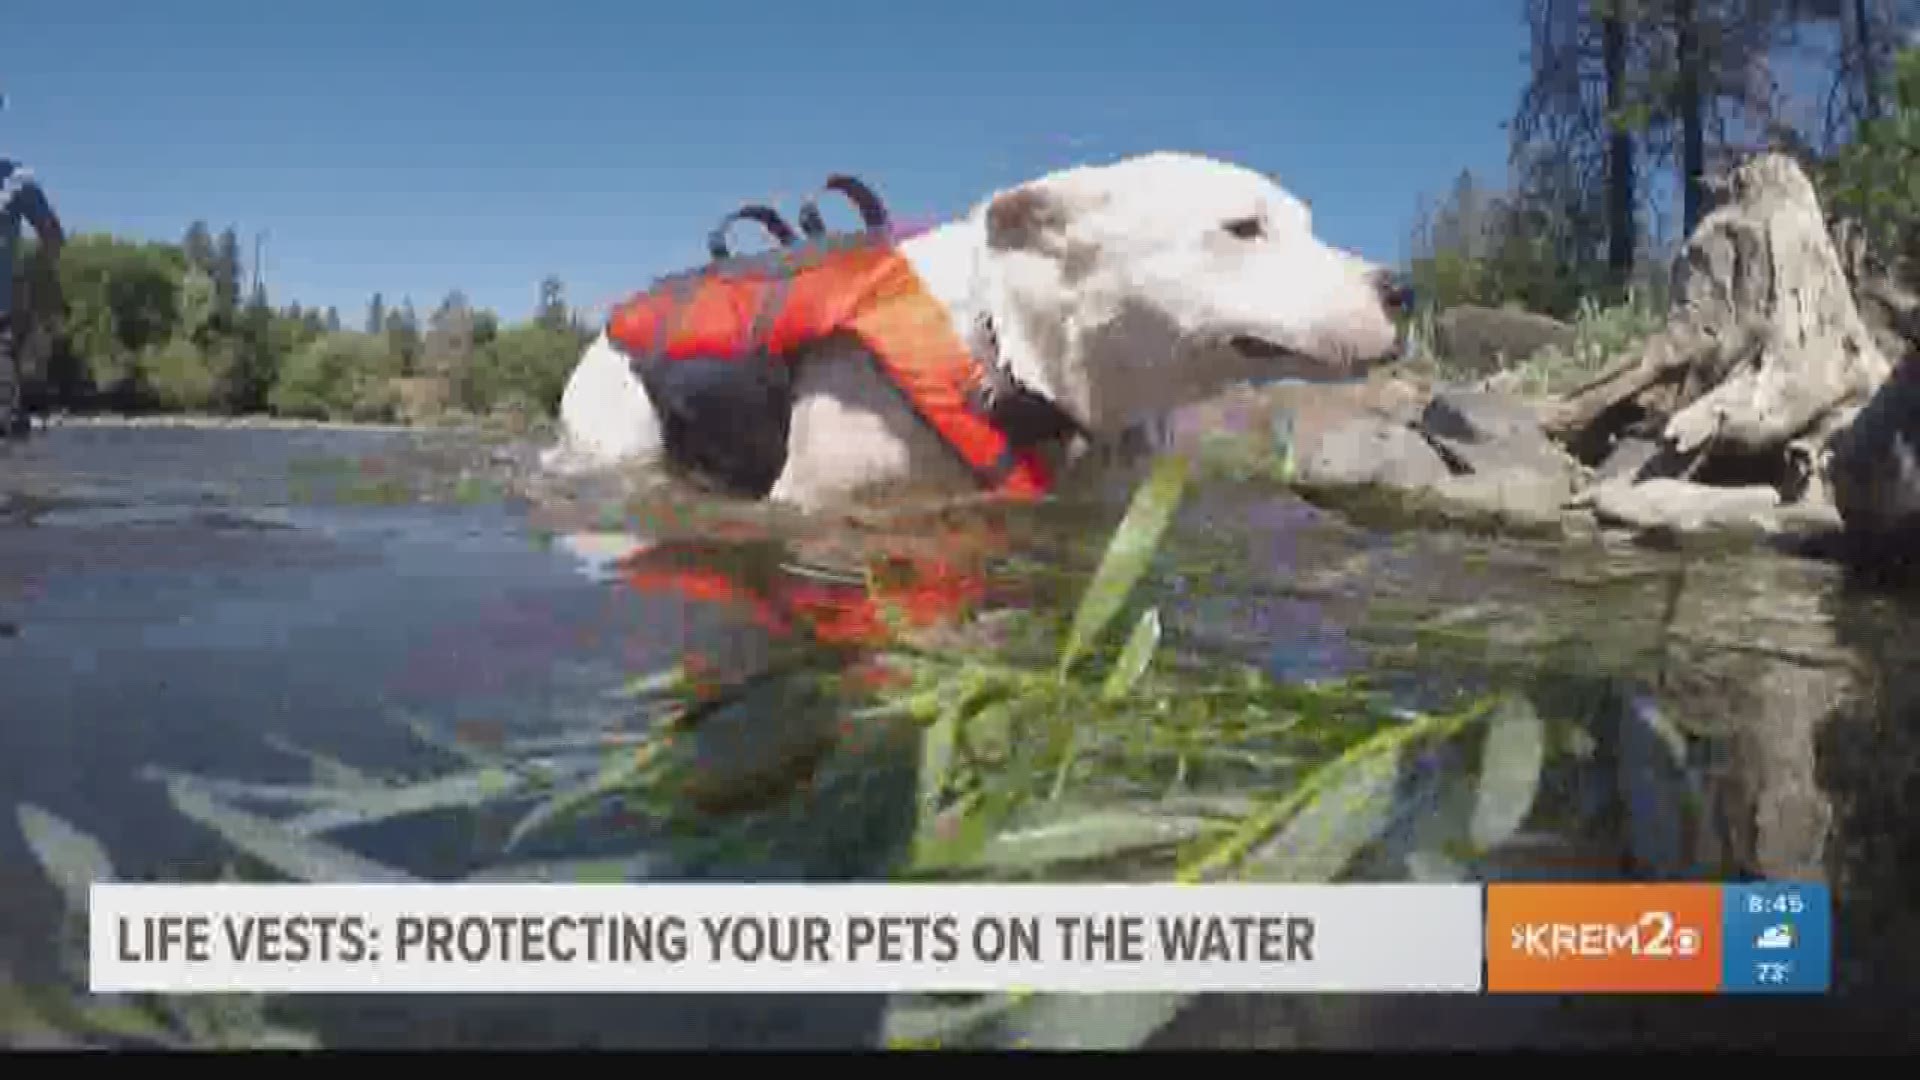 Life vests: Protecting your pets on the water (7-17-18)